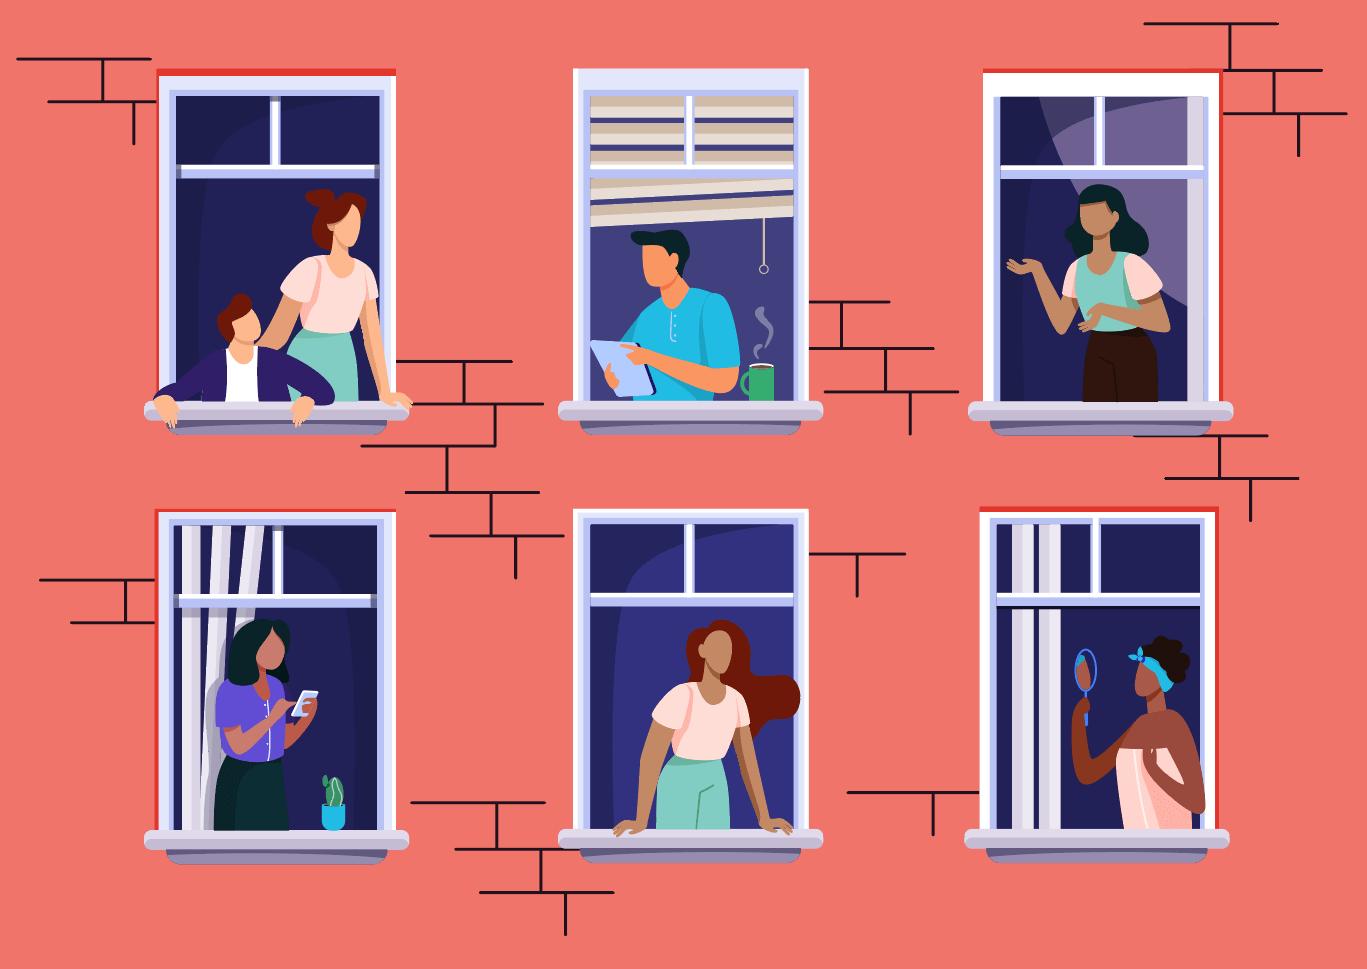 Illustration of an apartment building showing 6 windows with people in each of them going about their daily routines.